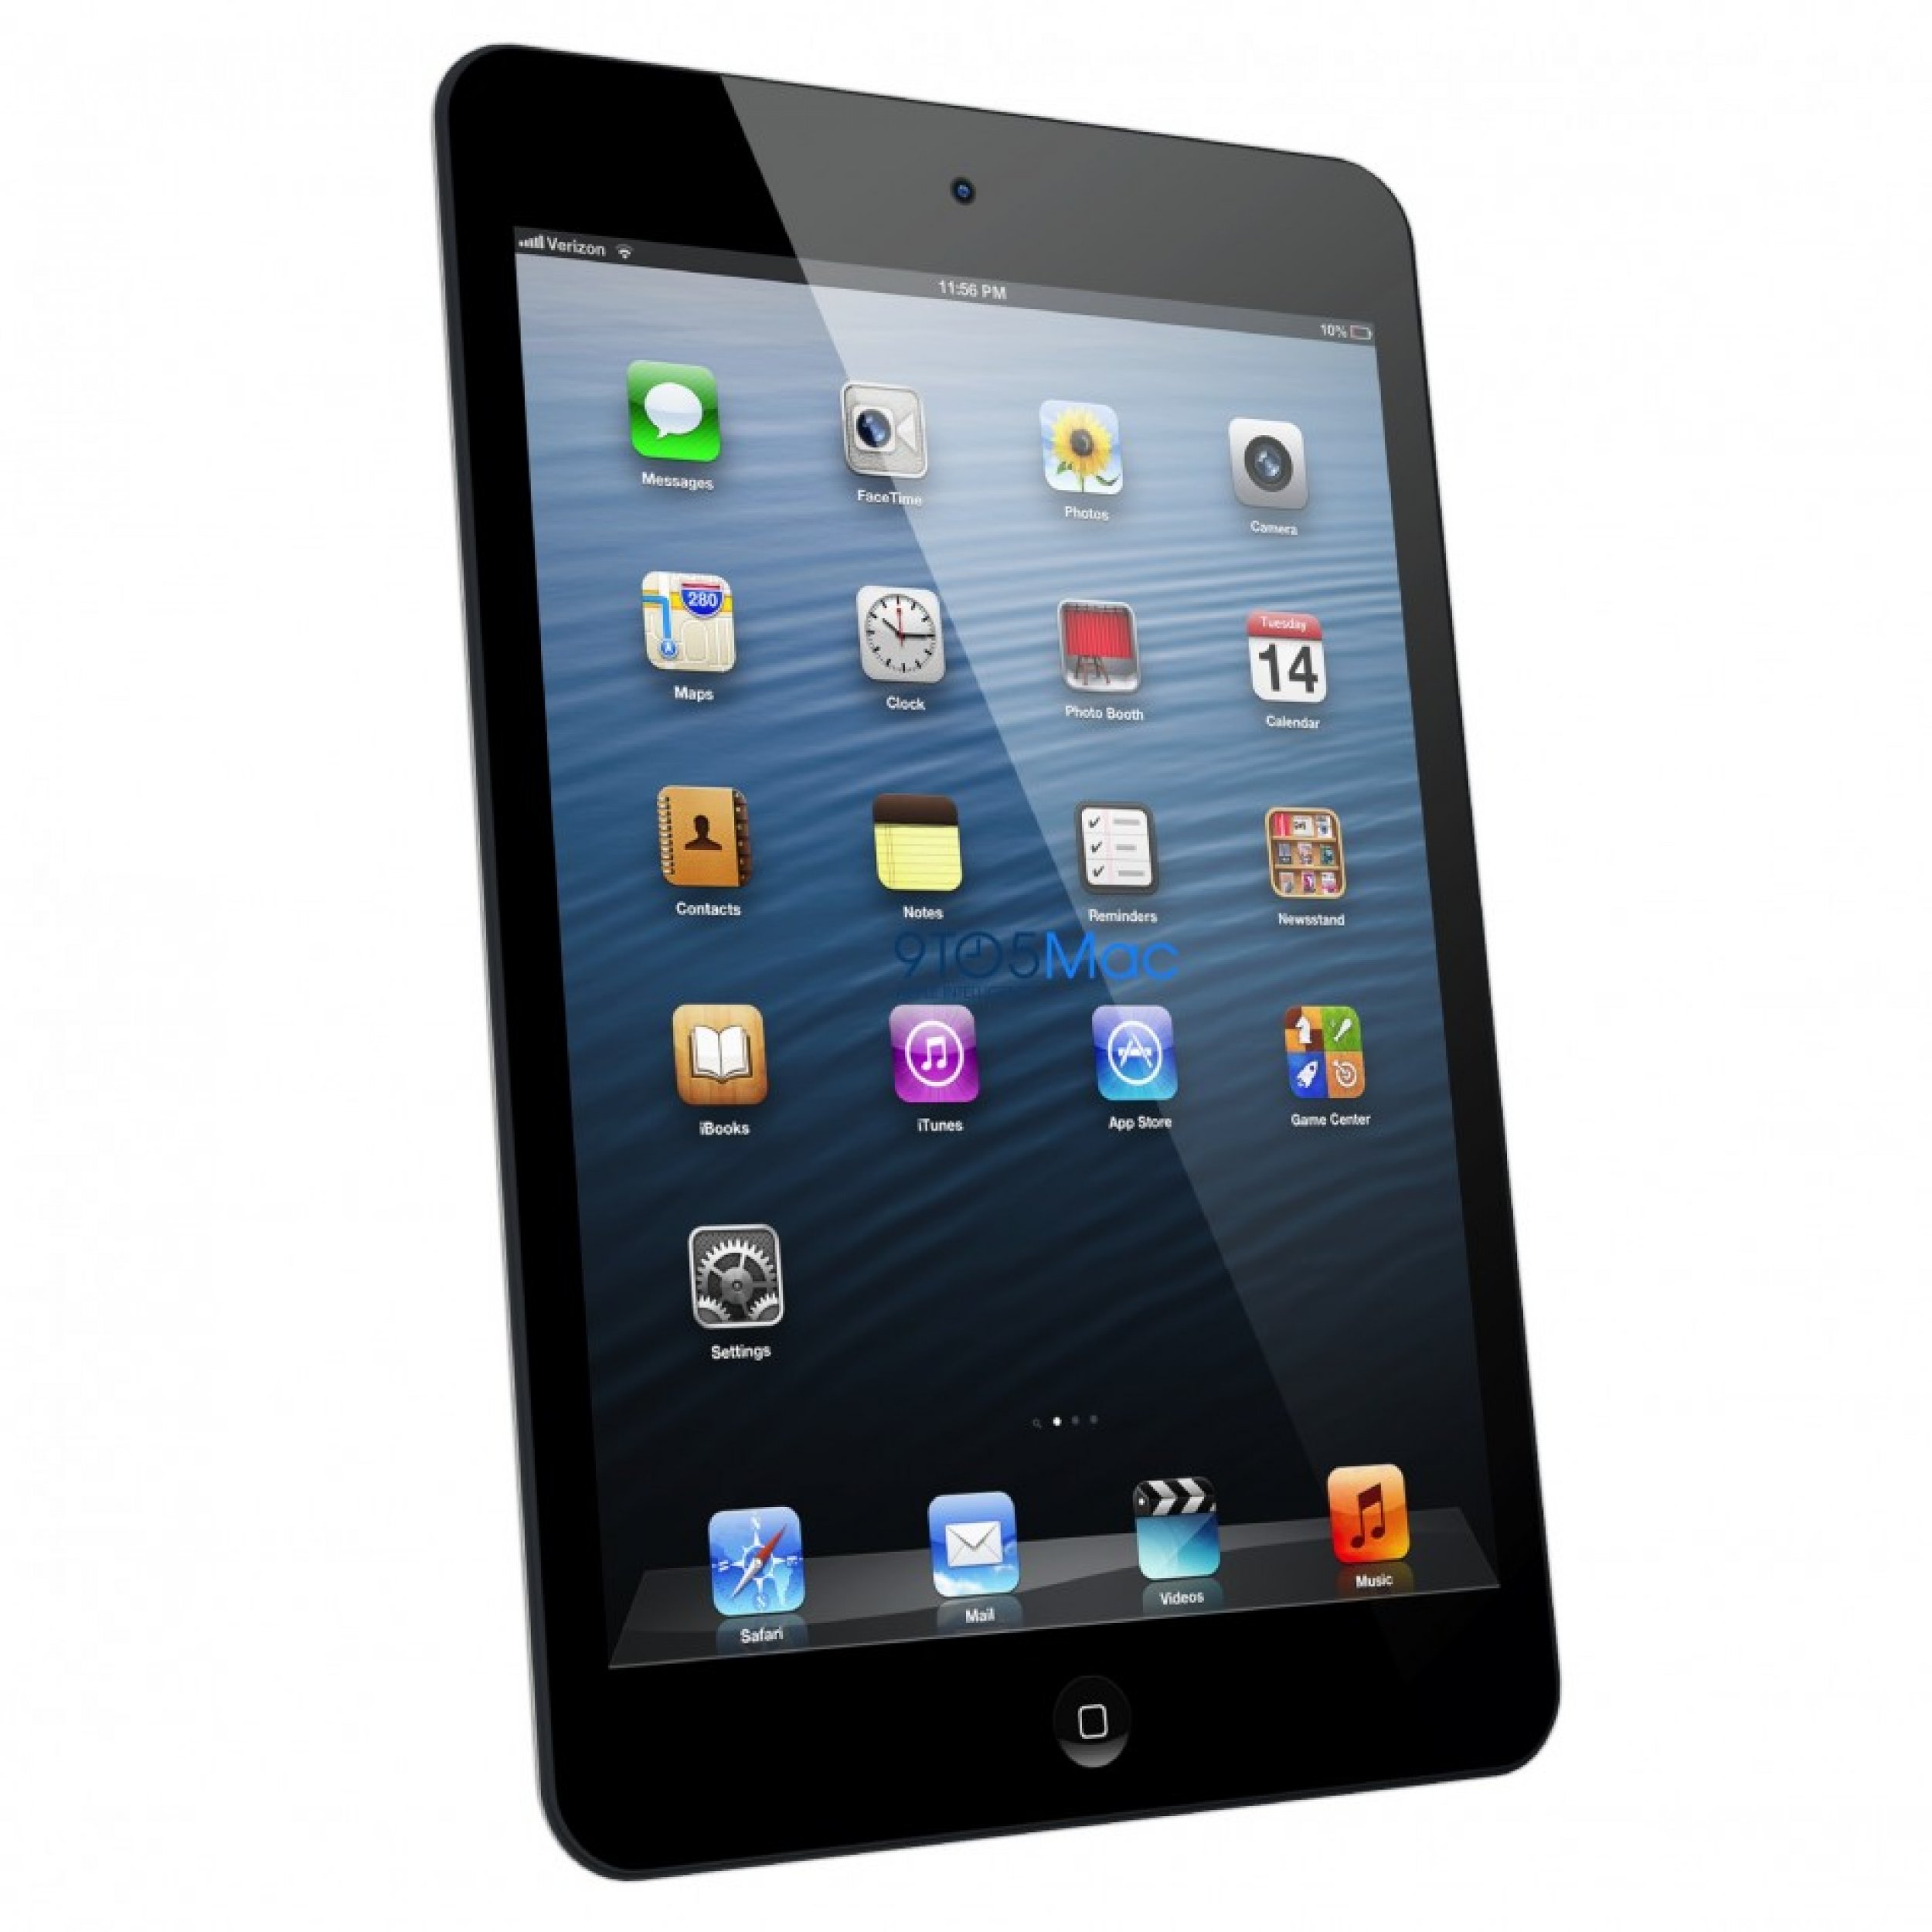 Apple iPad Mini Rumors Video Reveals New Tablet May Lack Cellular Connectivity Features